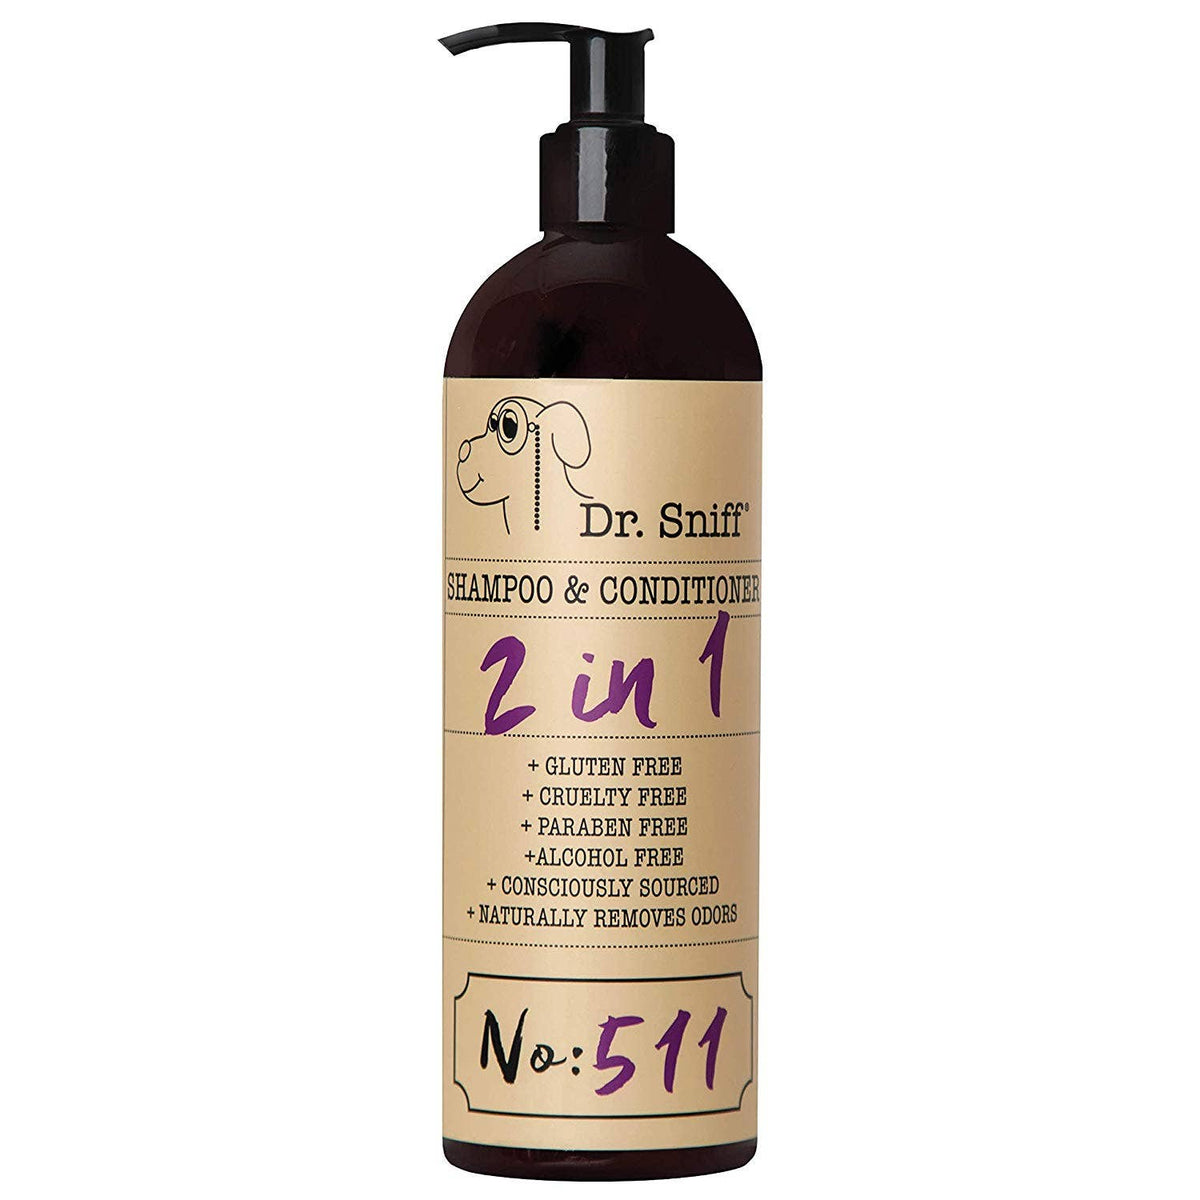 A bottle of Dr. Sniff - Calm Pup 2-in-1 Shampoo and Conditioner with a calming lavender scent and pump dispenser, labeled as gluten-free, cruelty-free, paraben-free, and consciously